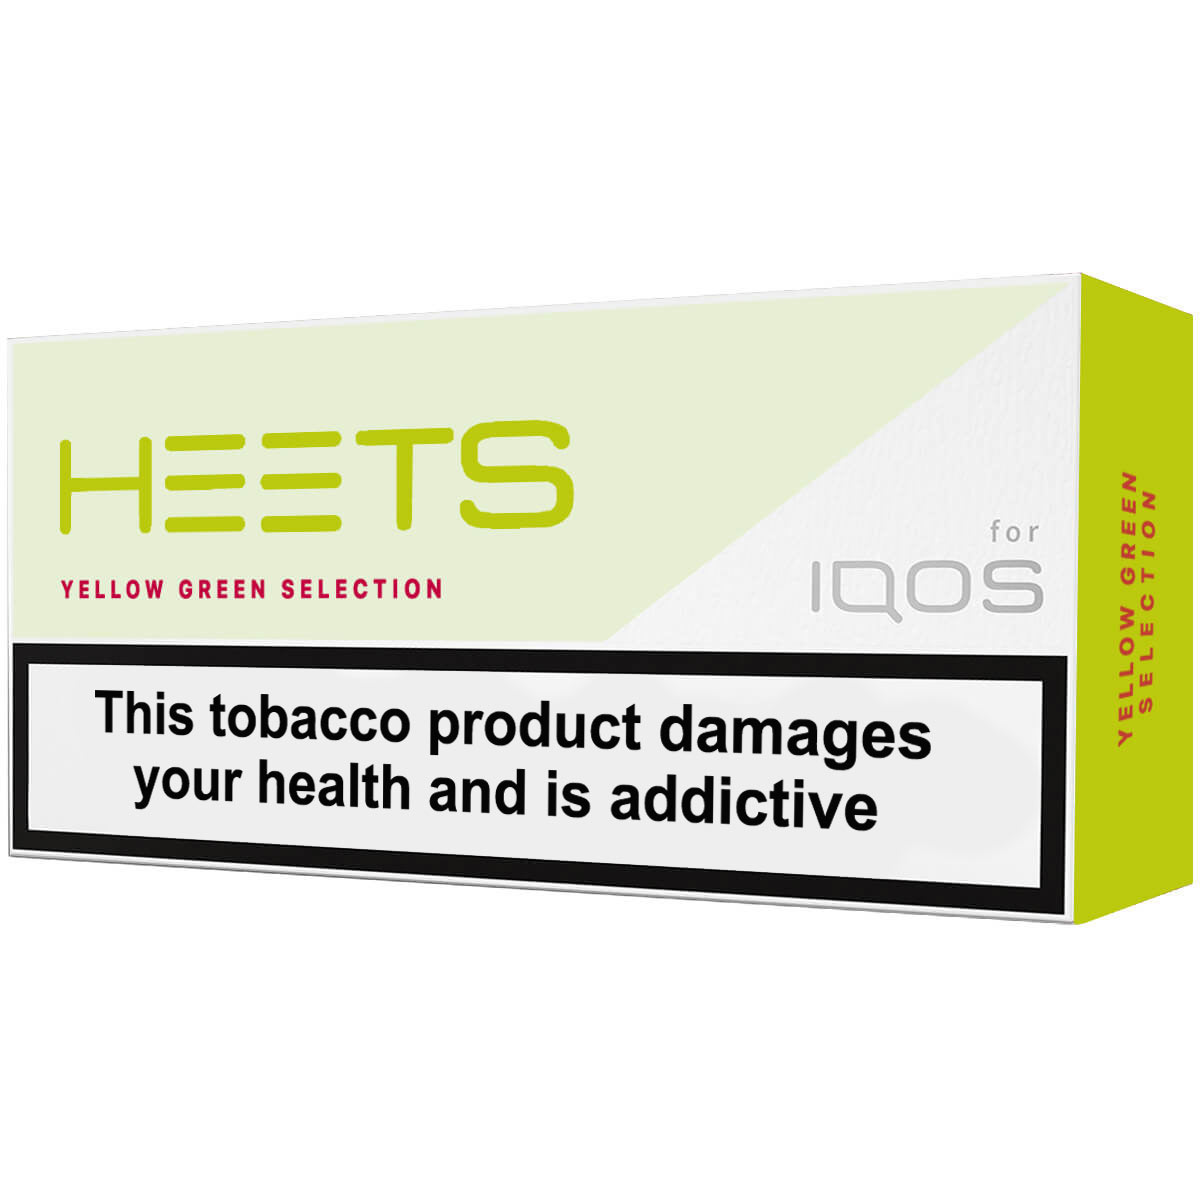 Heets - Yellow Green Selection